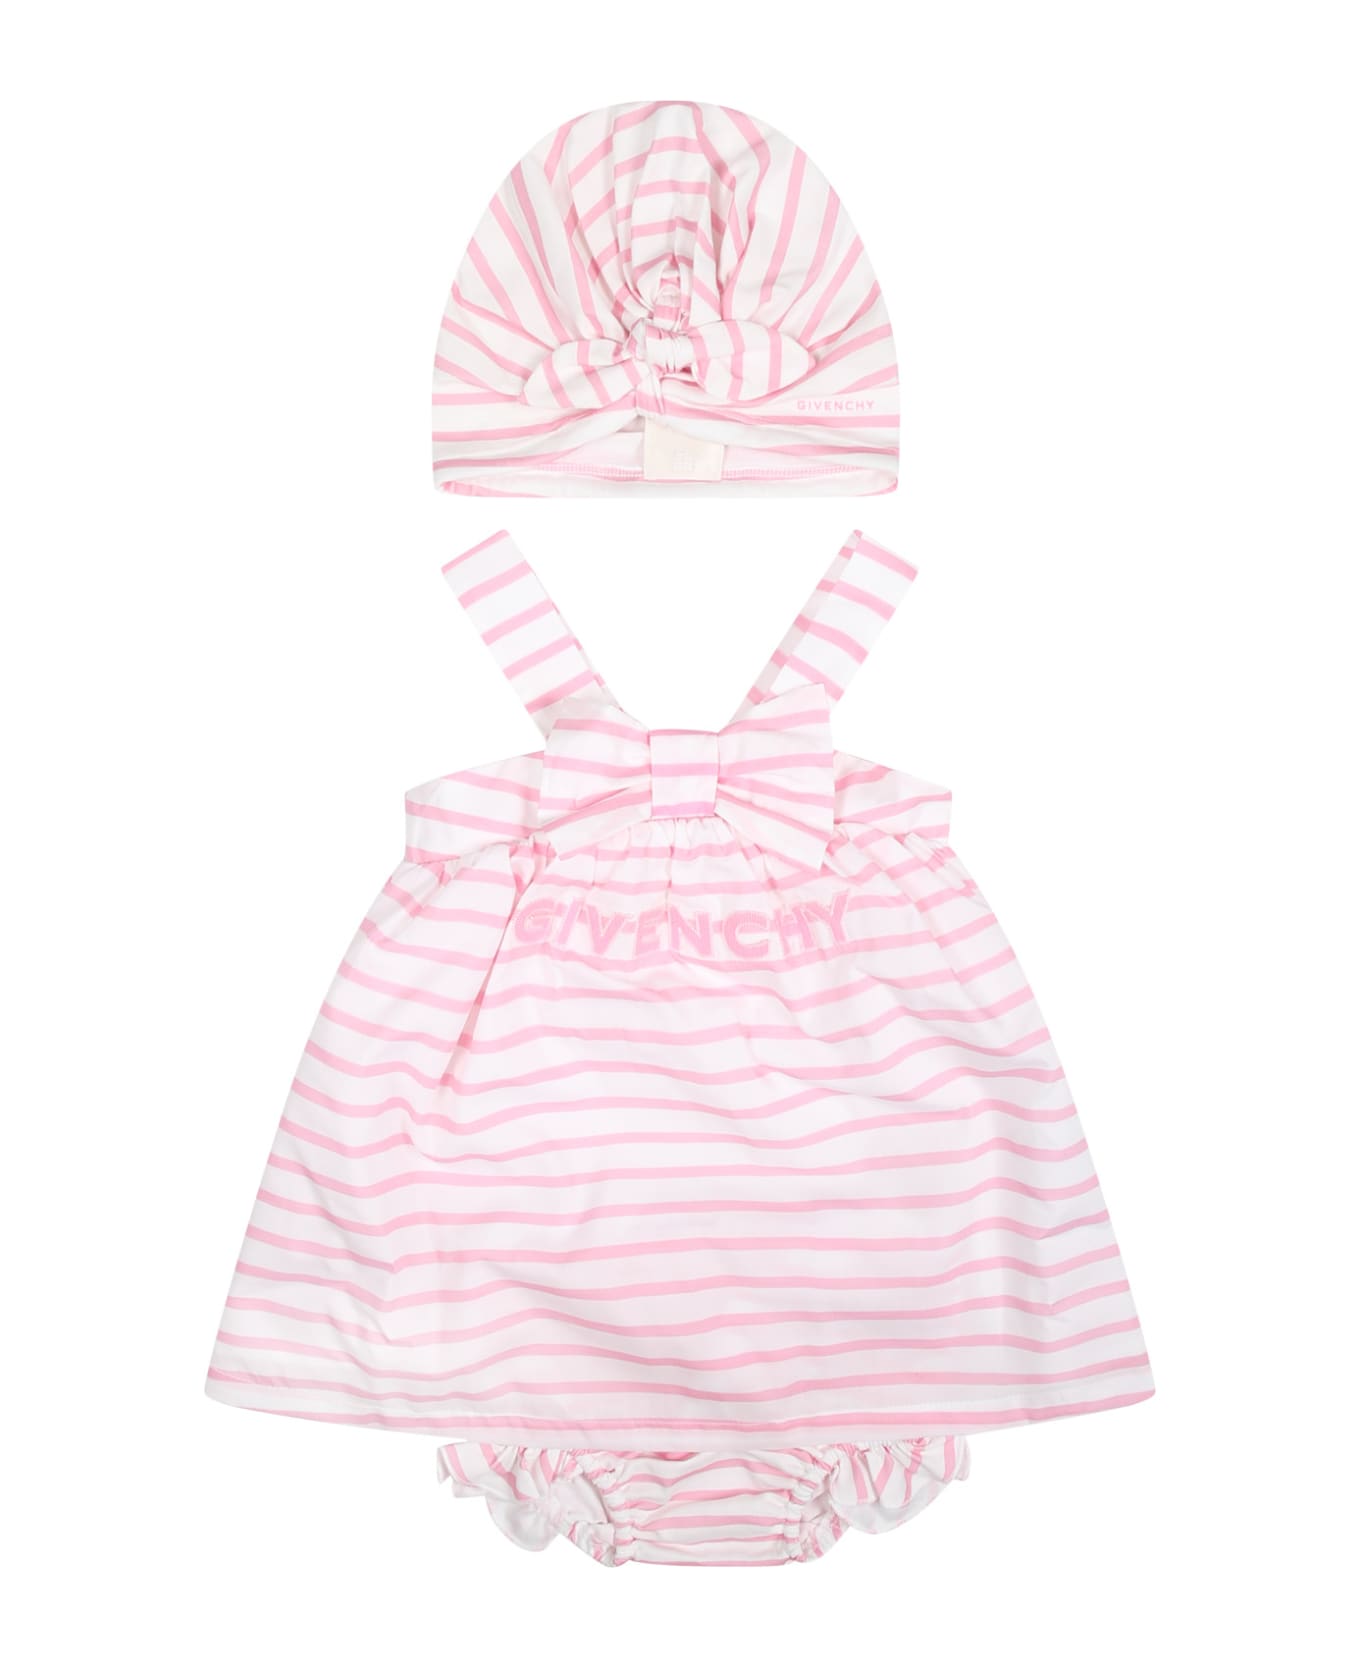 Givenchy Pink Dress For Baby Girl With Stripes - Rosa ウェア